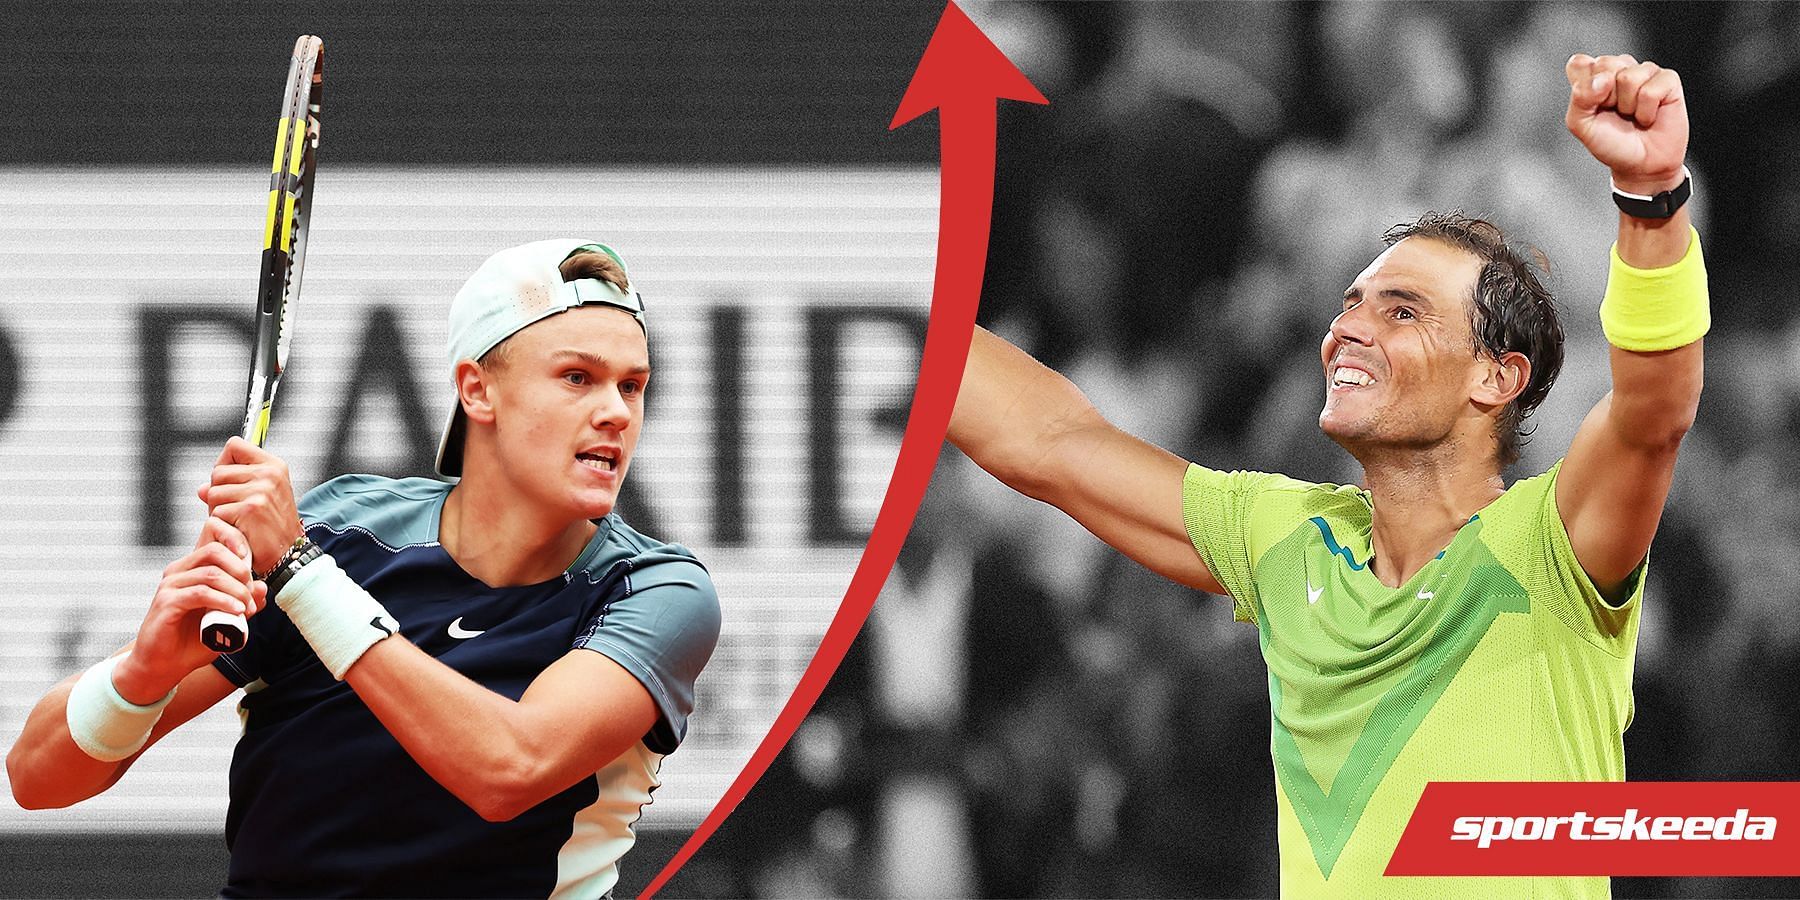 Rafael Nadal and Holger Rune were among the biggest winners in the rankings race.